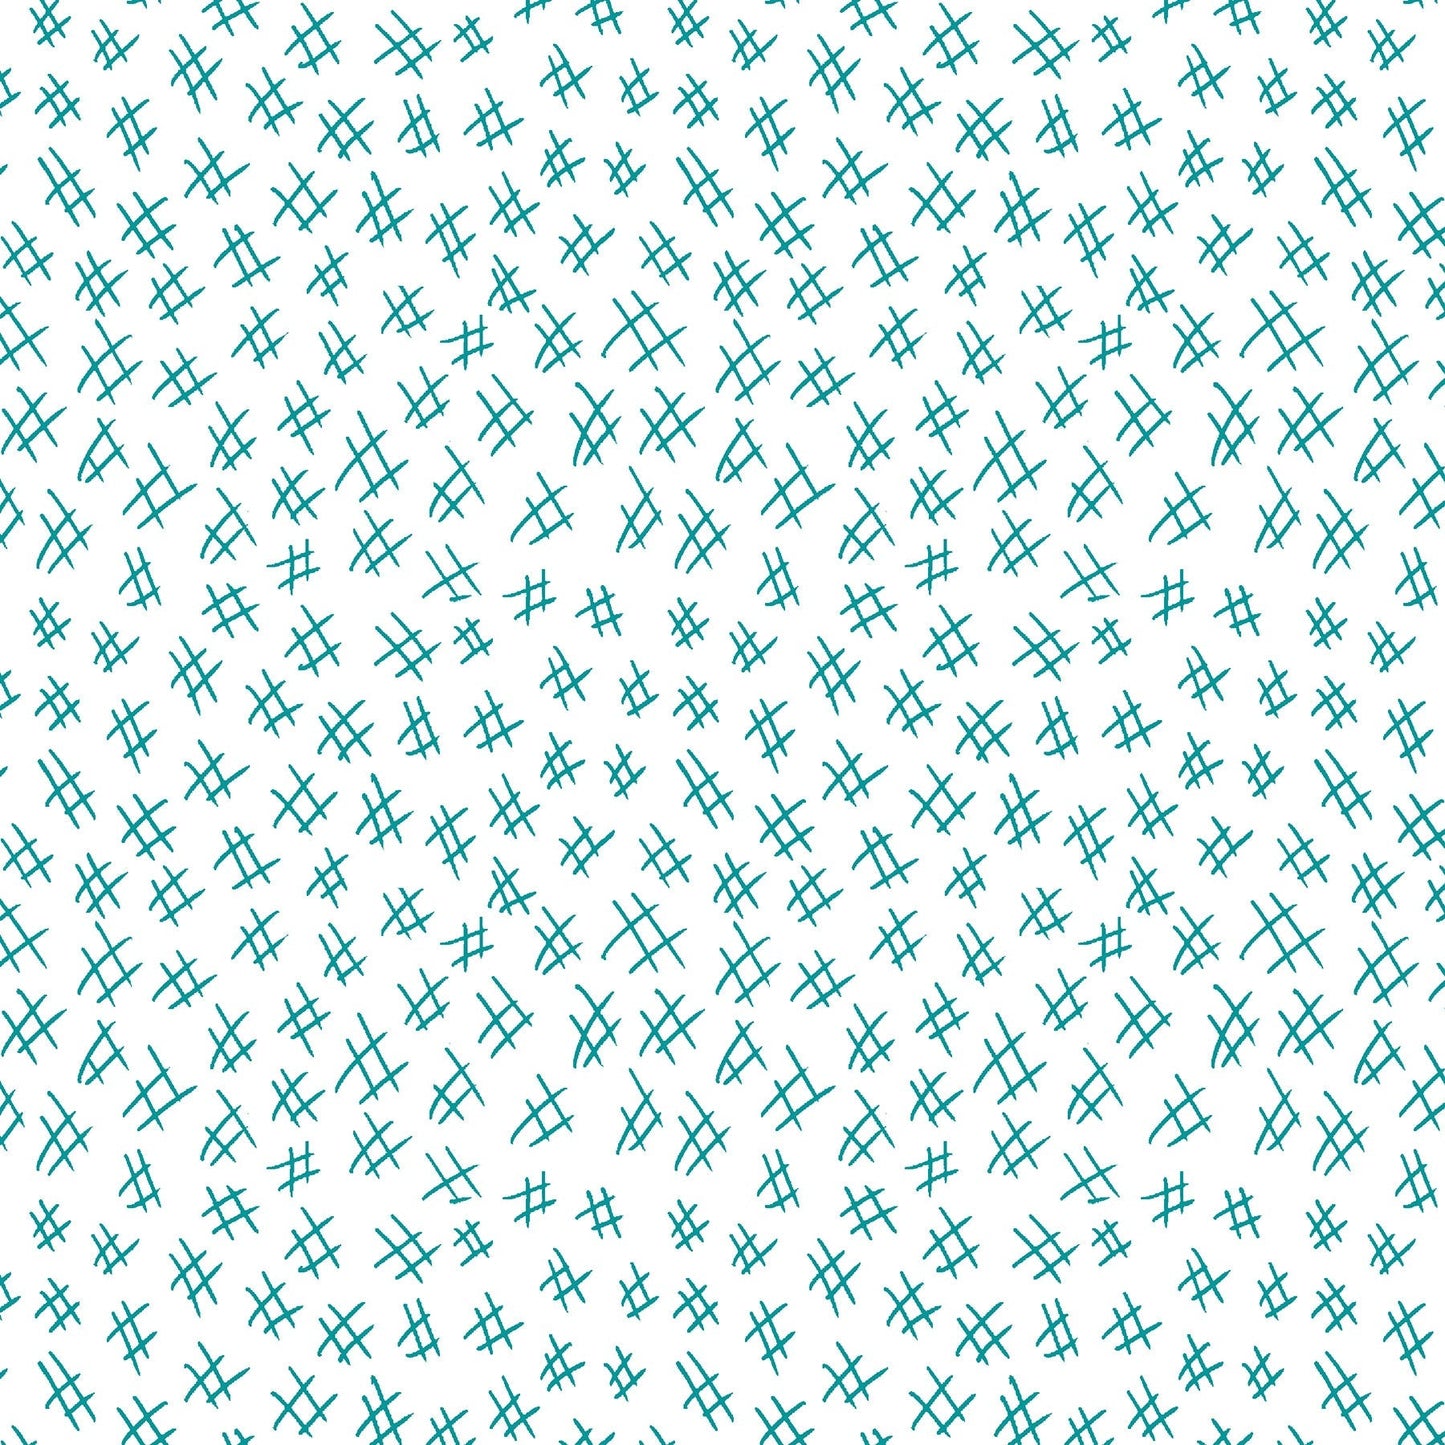  Hashtags in teal and white (13263-80)  is from Stitchy by Christa Watson for Benartex. The hashtags print features a white background with teal hashtags to provide a light tone for the collection and will serve well as a background fabric, a contrast fabric, or any where the eye needs to rest in your project.